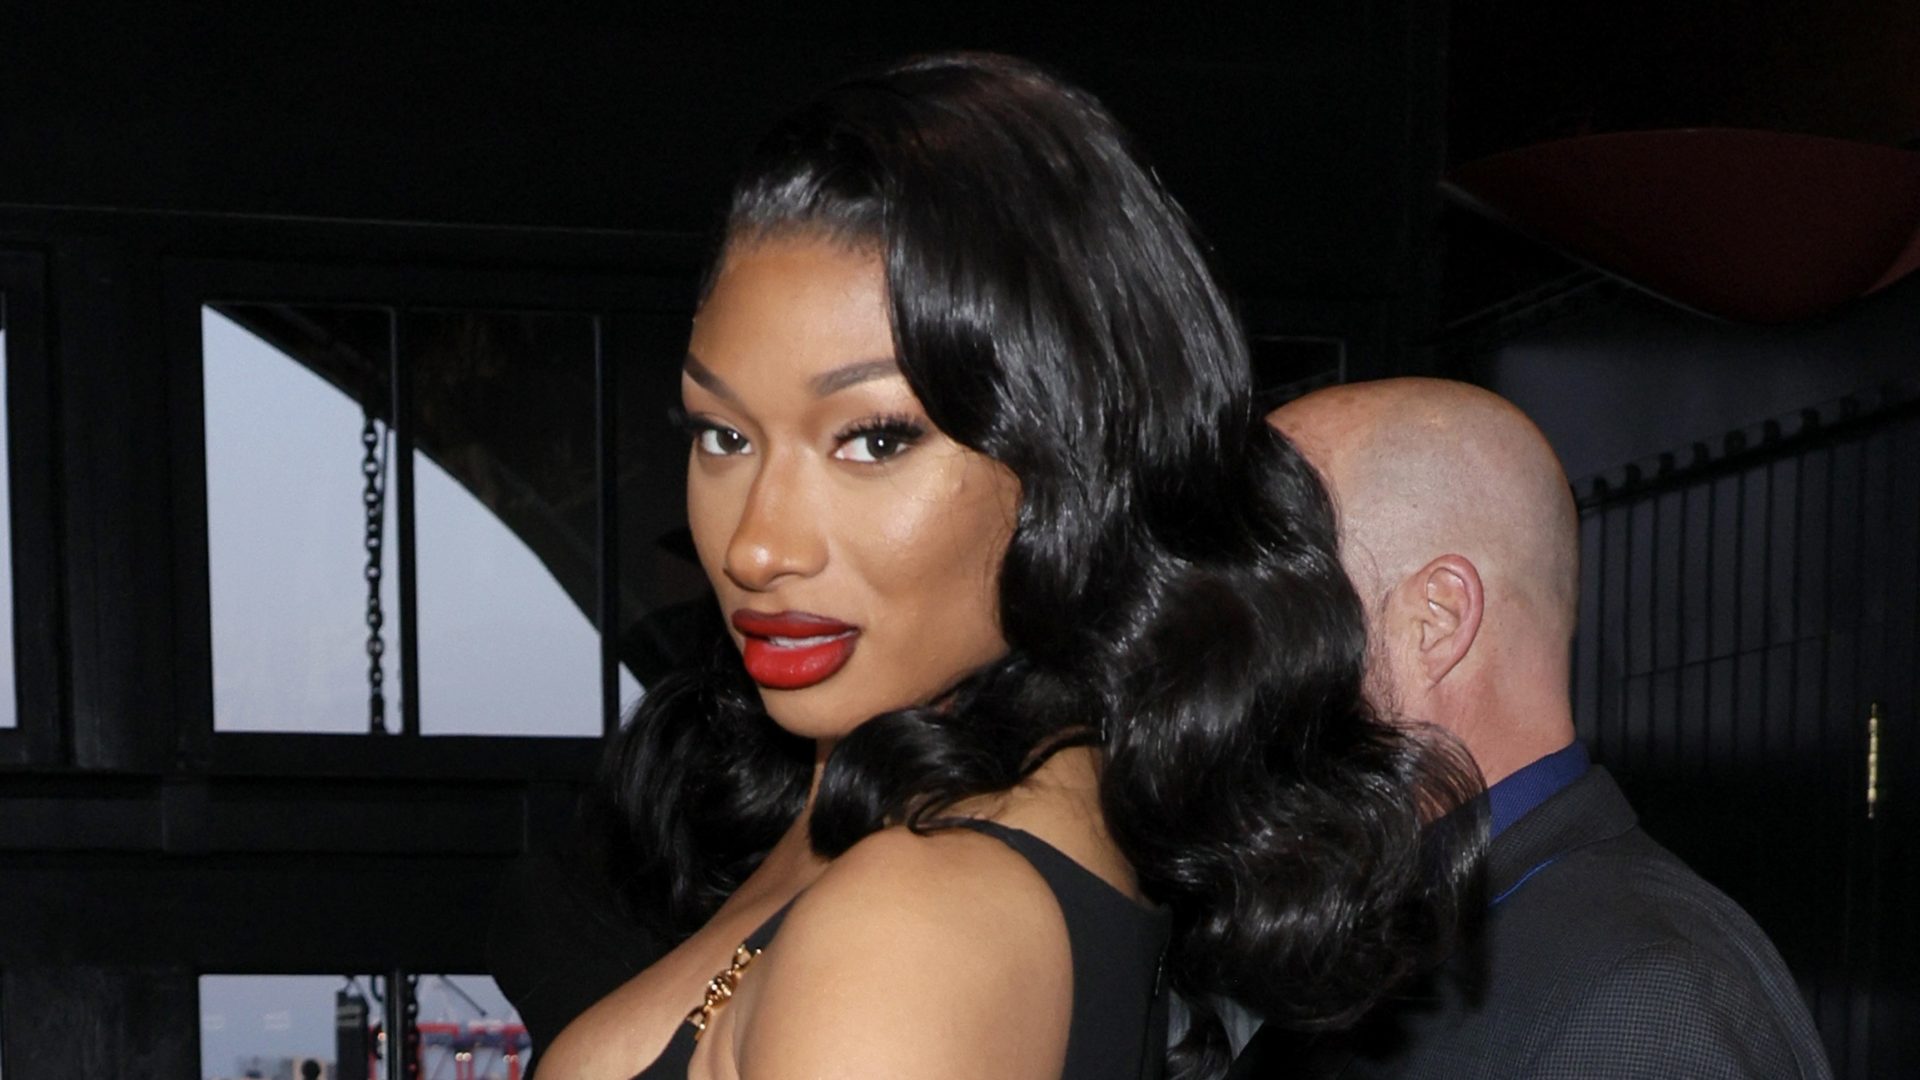 UPDATE: Megan Thee Stallion’s Attorney Issues Statement After She’s Accused Of Harassment In New Lawsuit